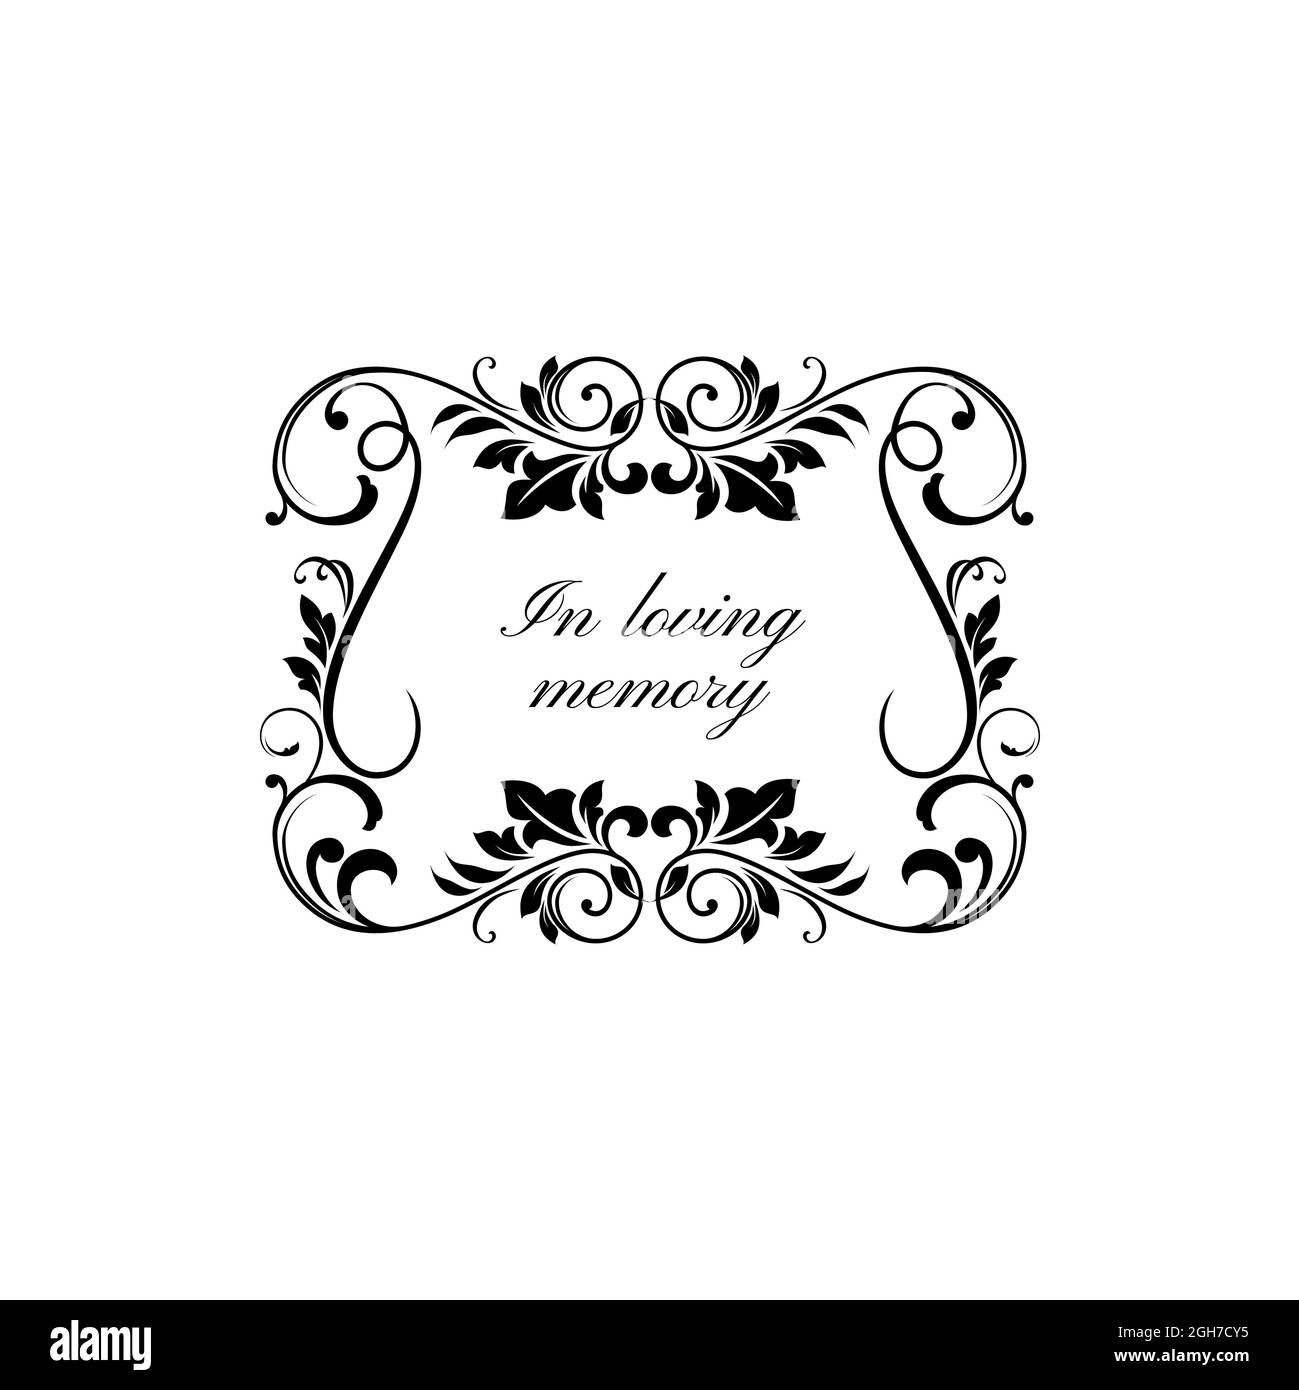 In loving memory floral ornament on gravestone isolated monochrome frame. Vector condolence message on tomb stone with vintage flower ornaments and le Stock Vector